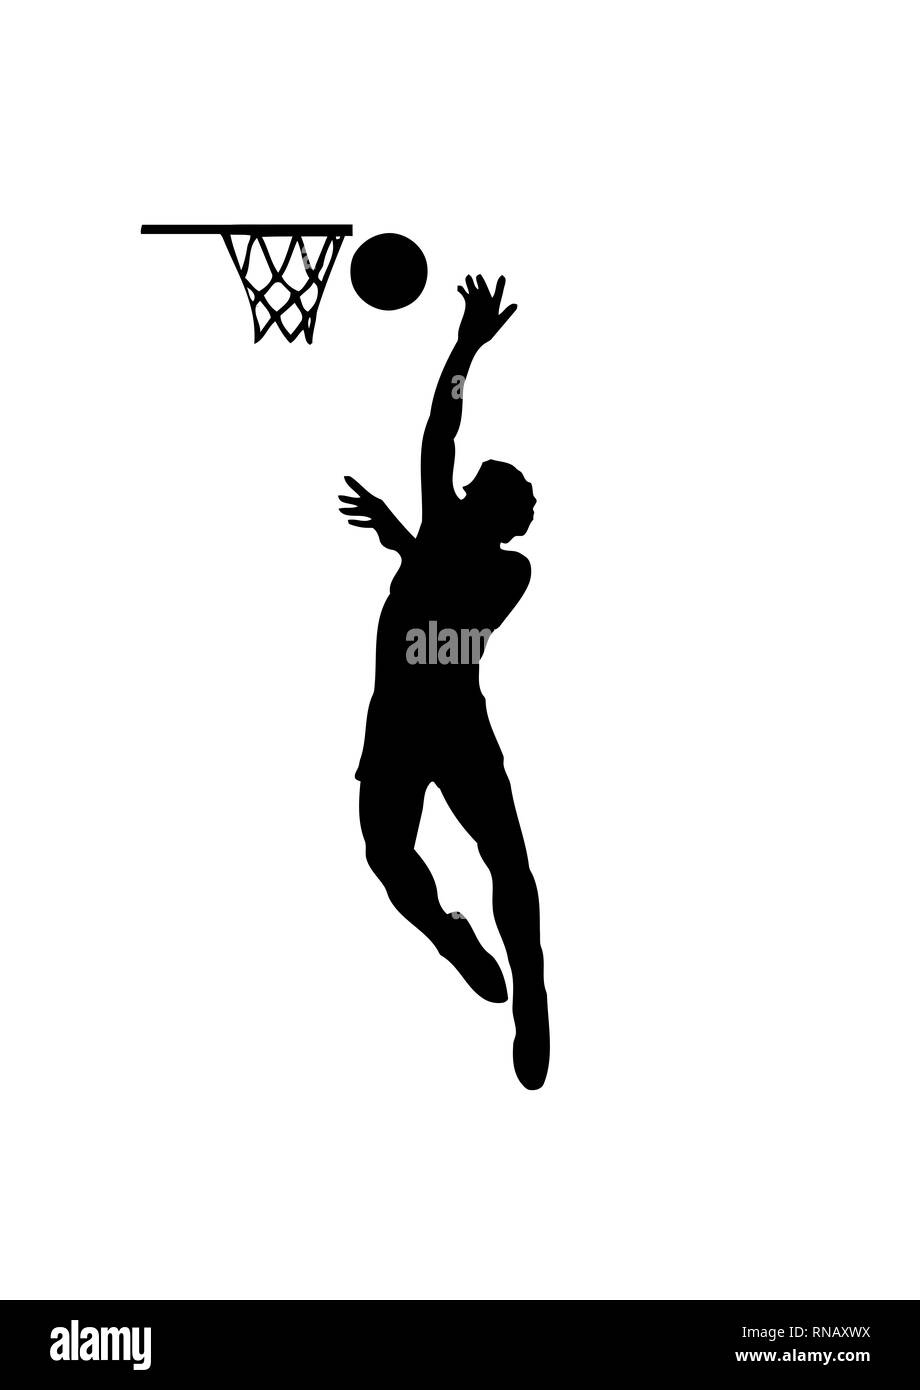 basketball player sport silhouette action jump illustration Stock Photo